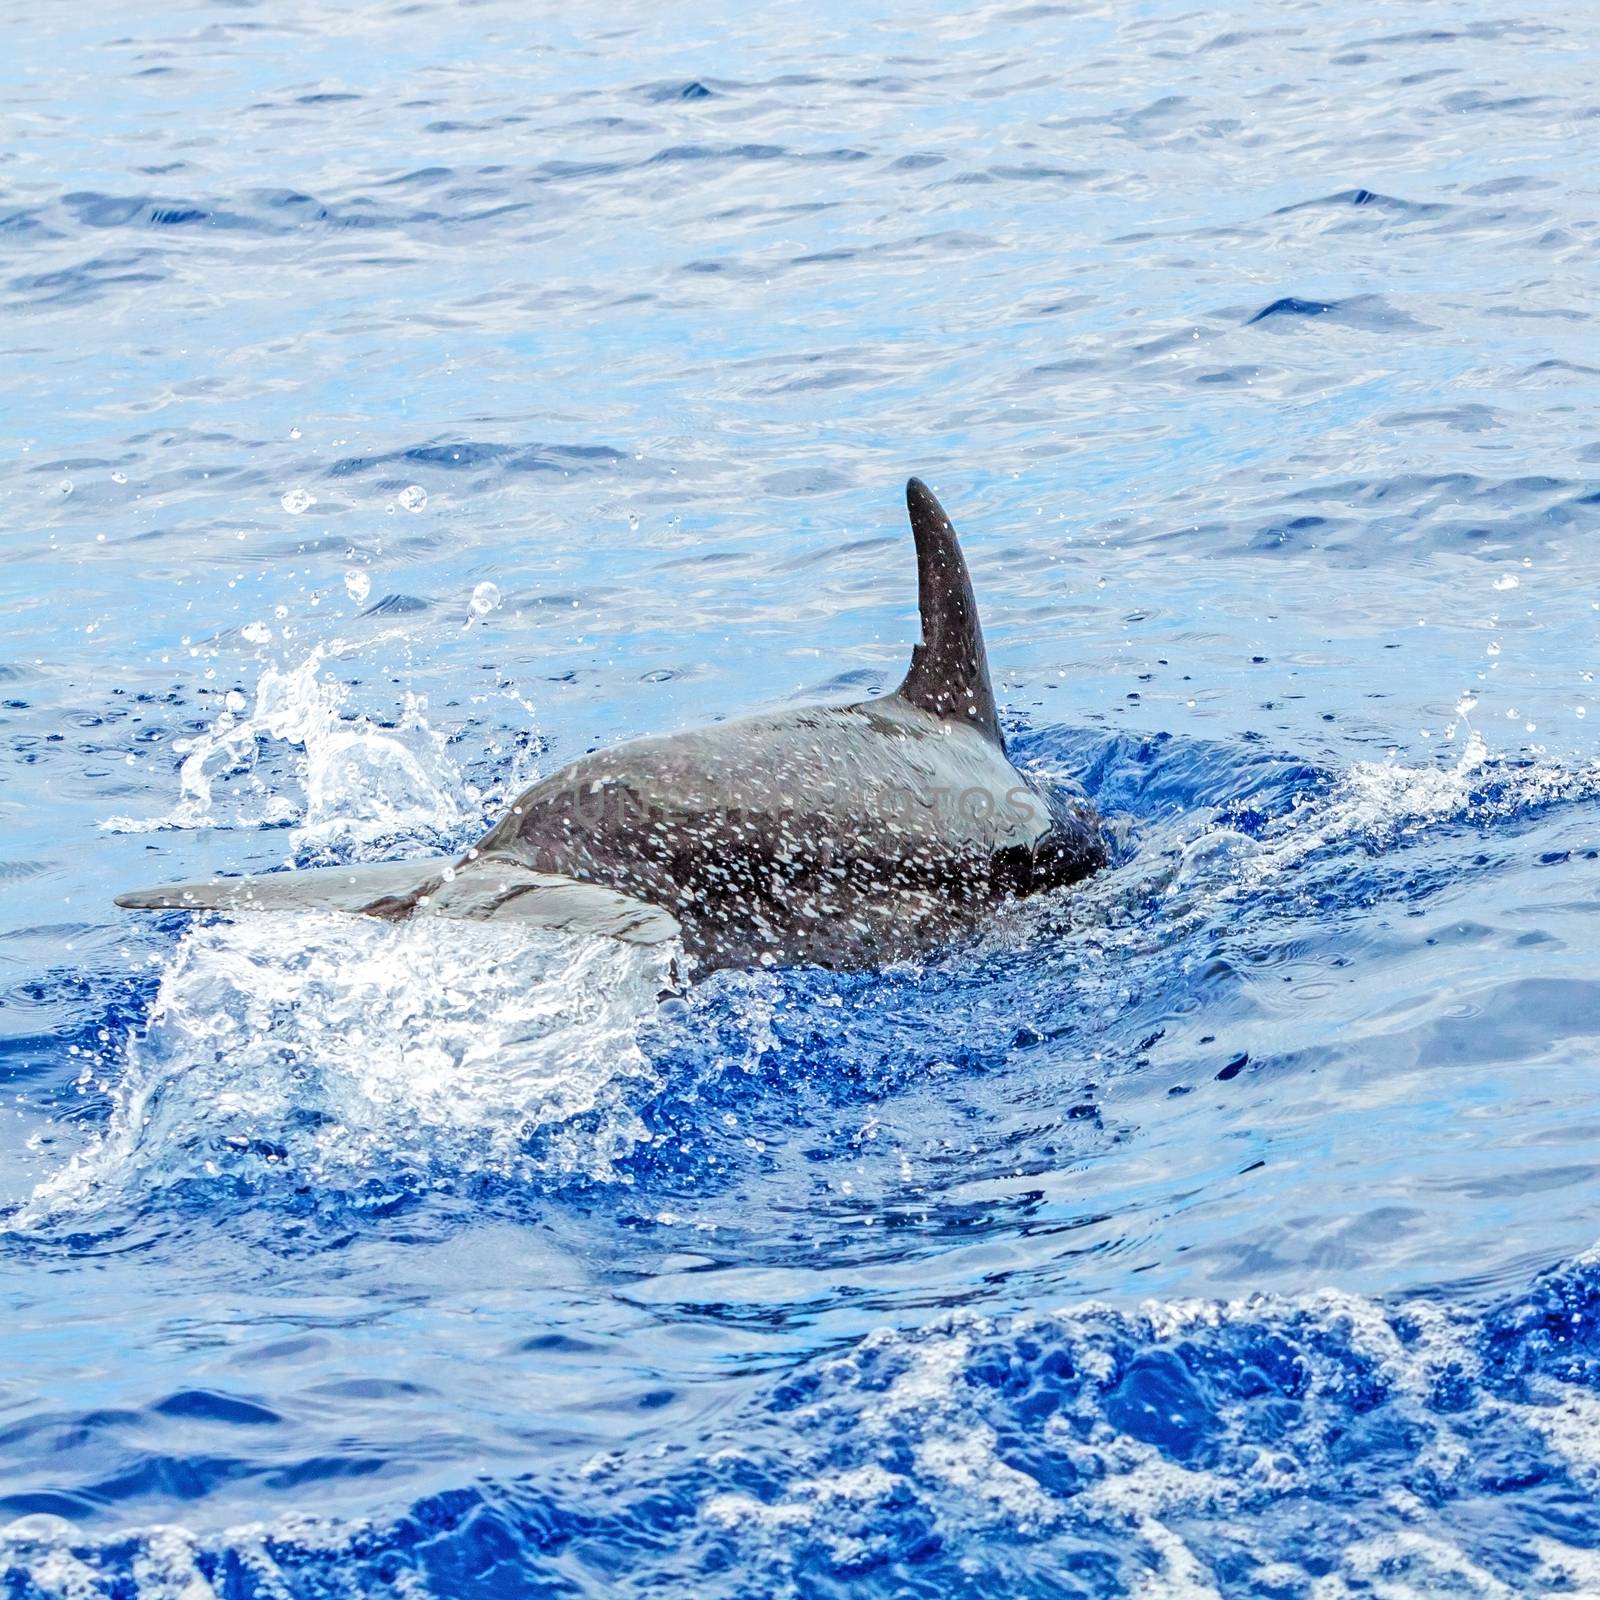 Tail of a jumping dolphin in the wild ocean